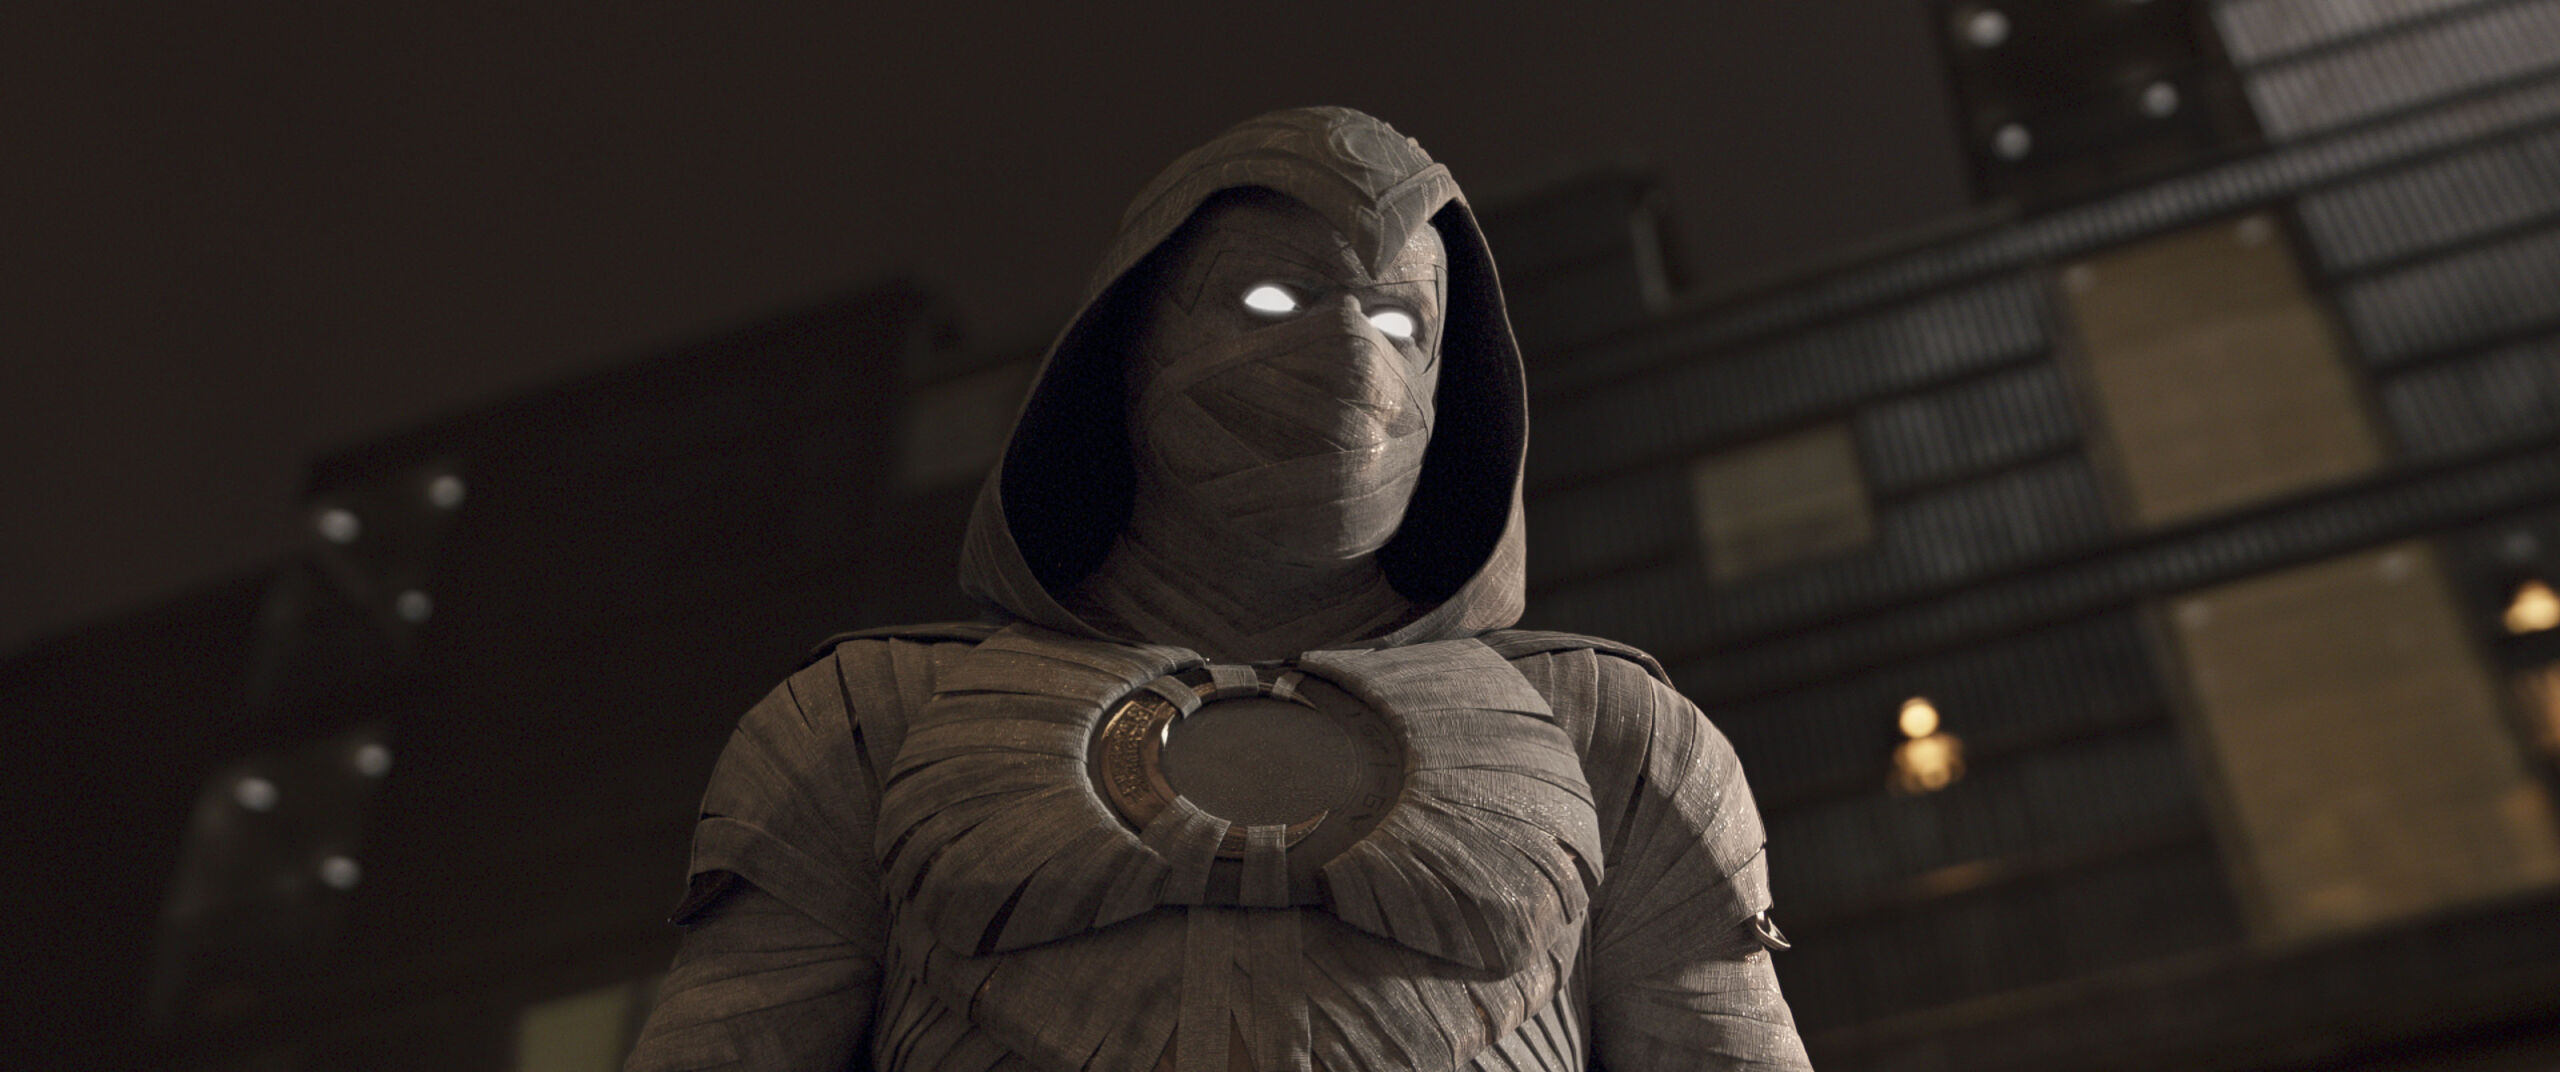 Moon Knight Season 2 Rumored to Include Kang the Conqueror